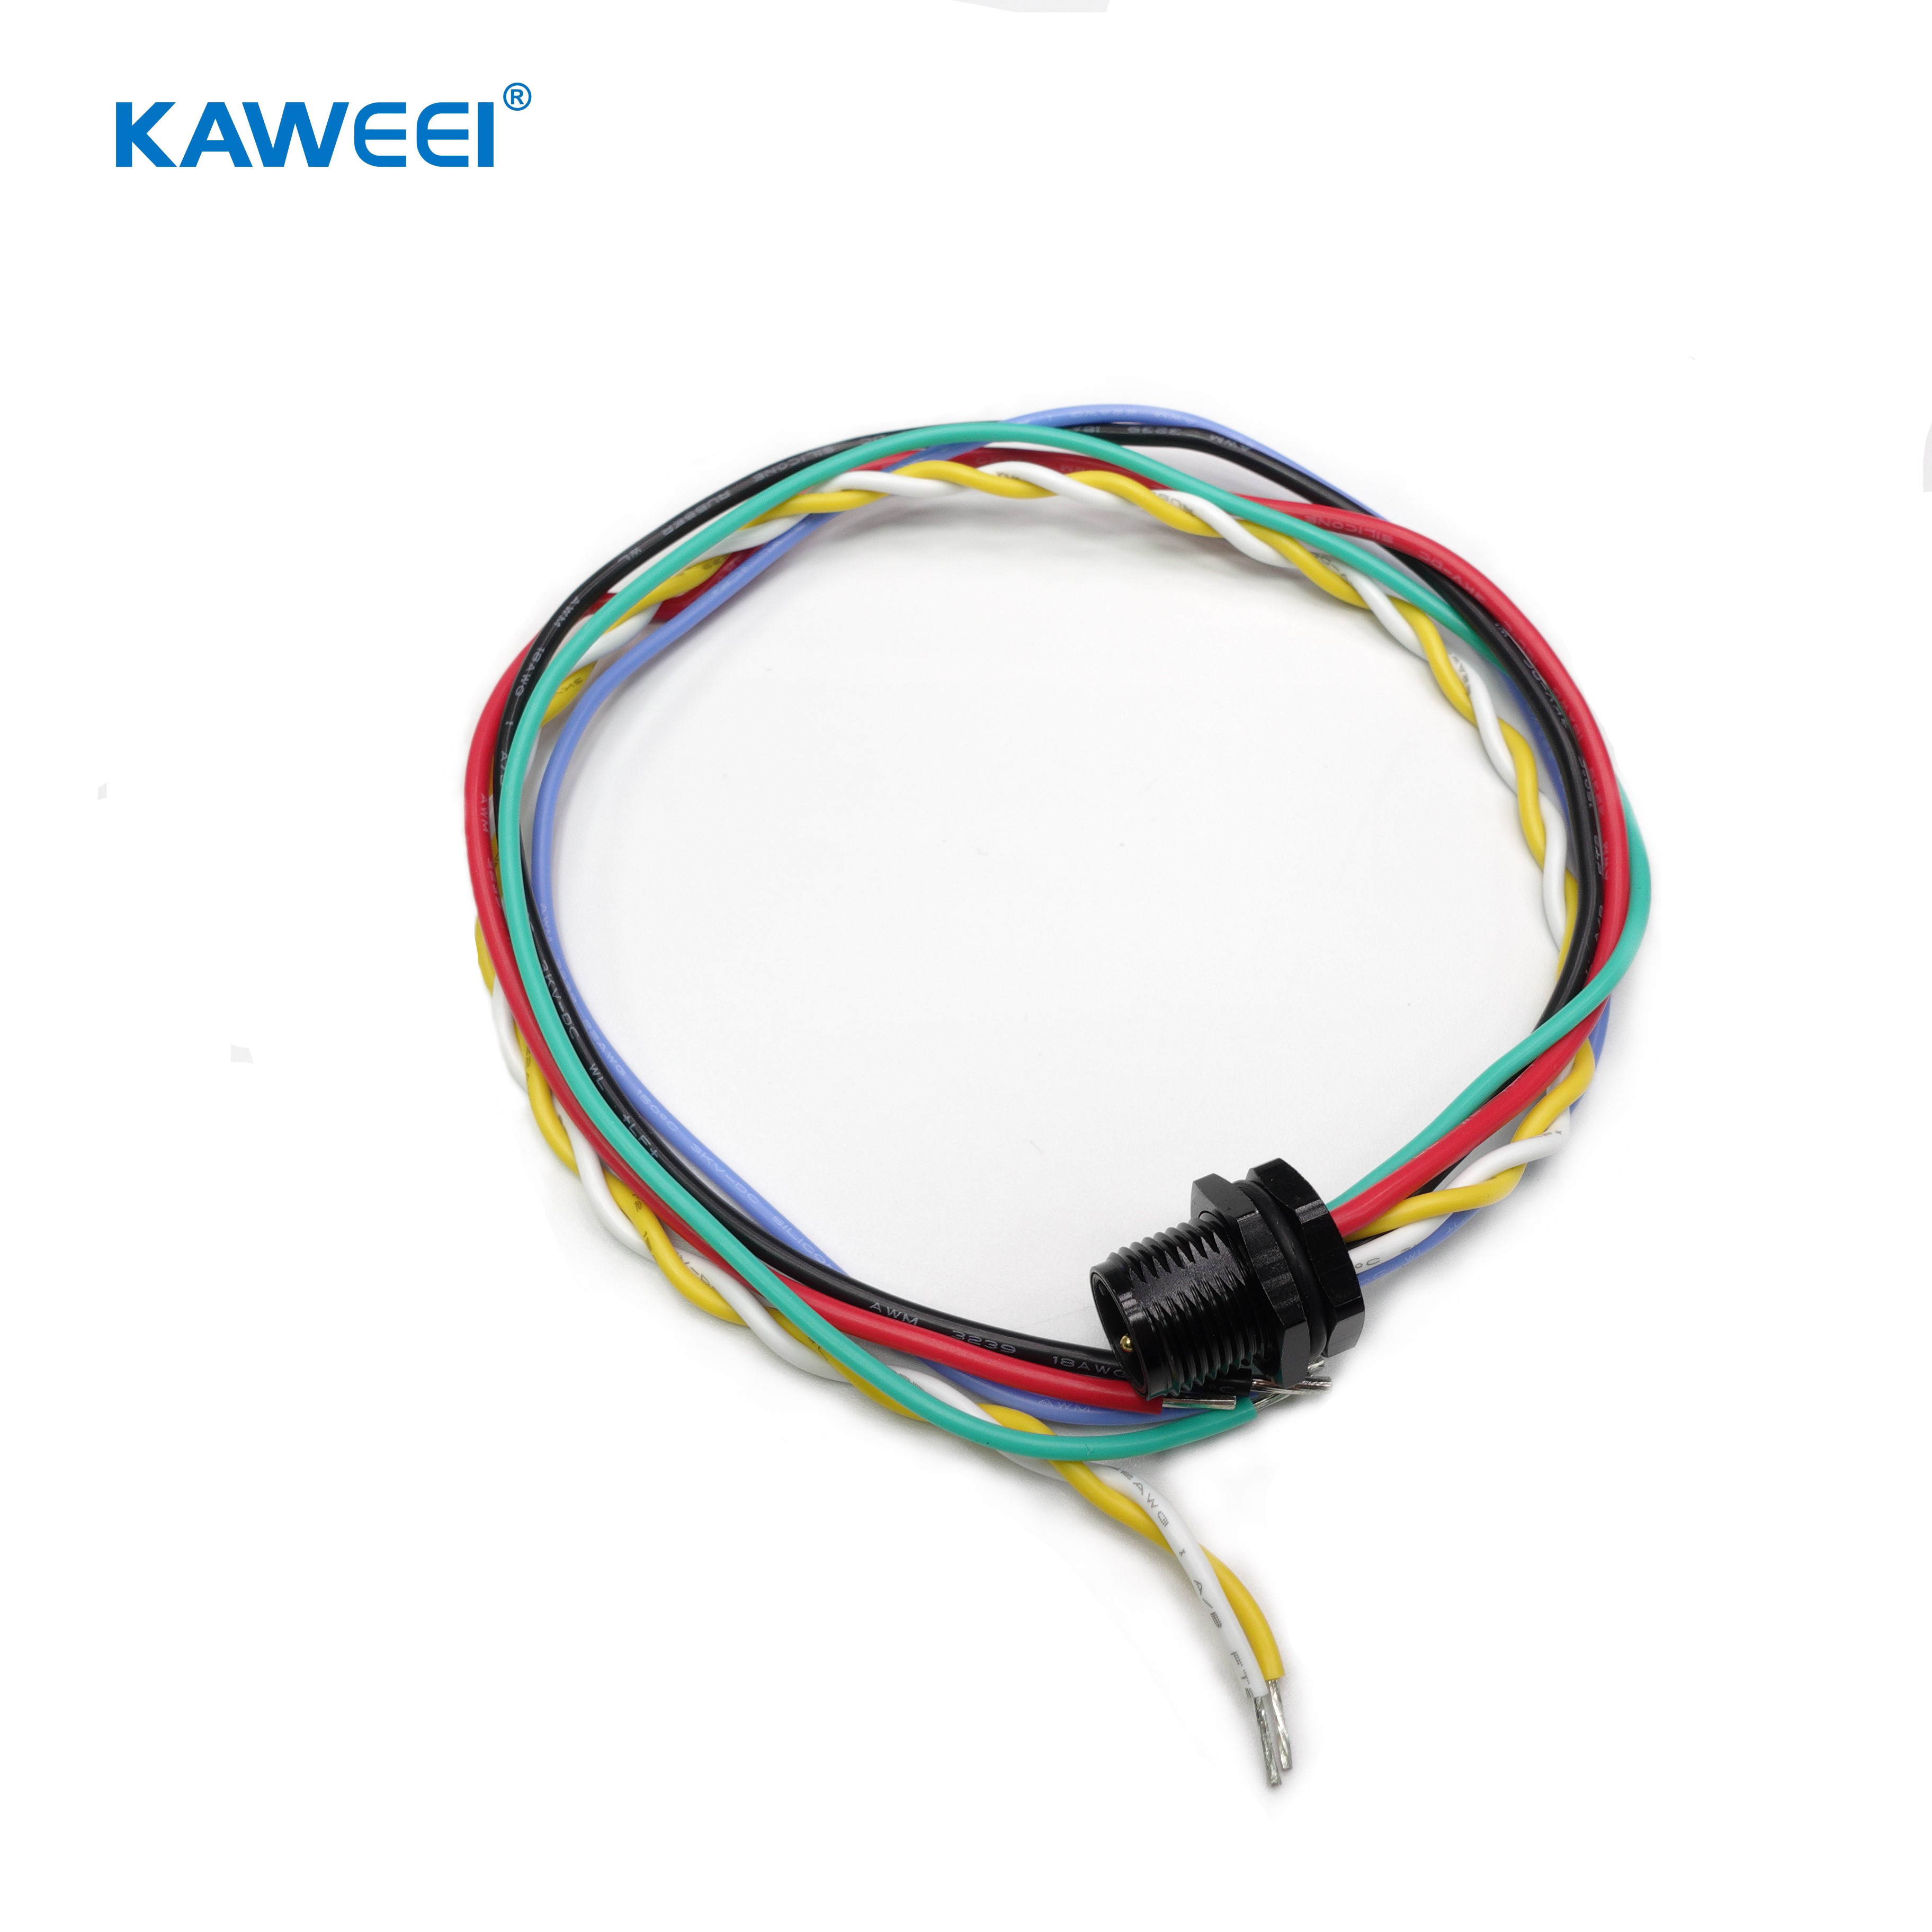 M12 4 + 2pin panel screw connector wiring harness waterproof wire harness